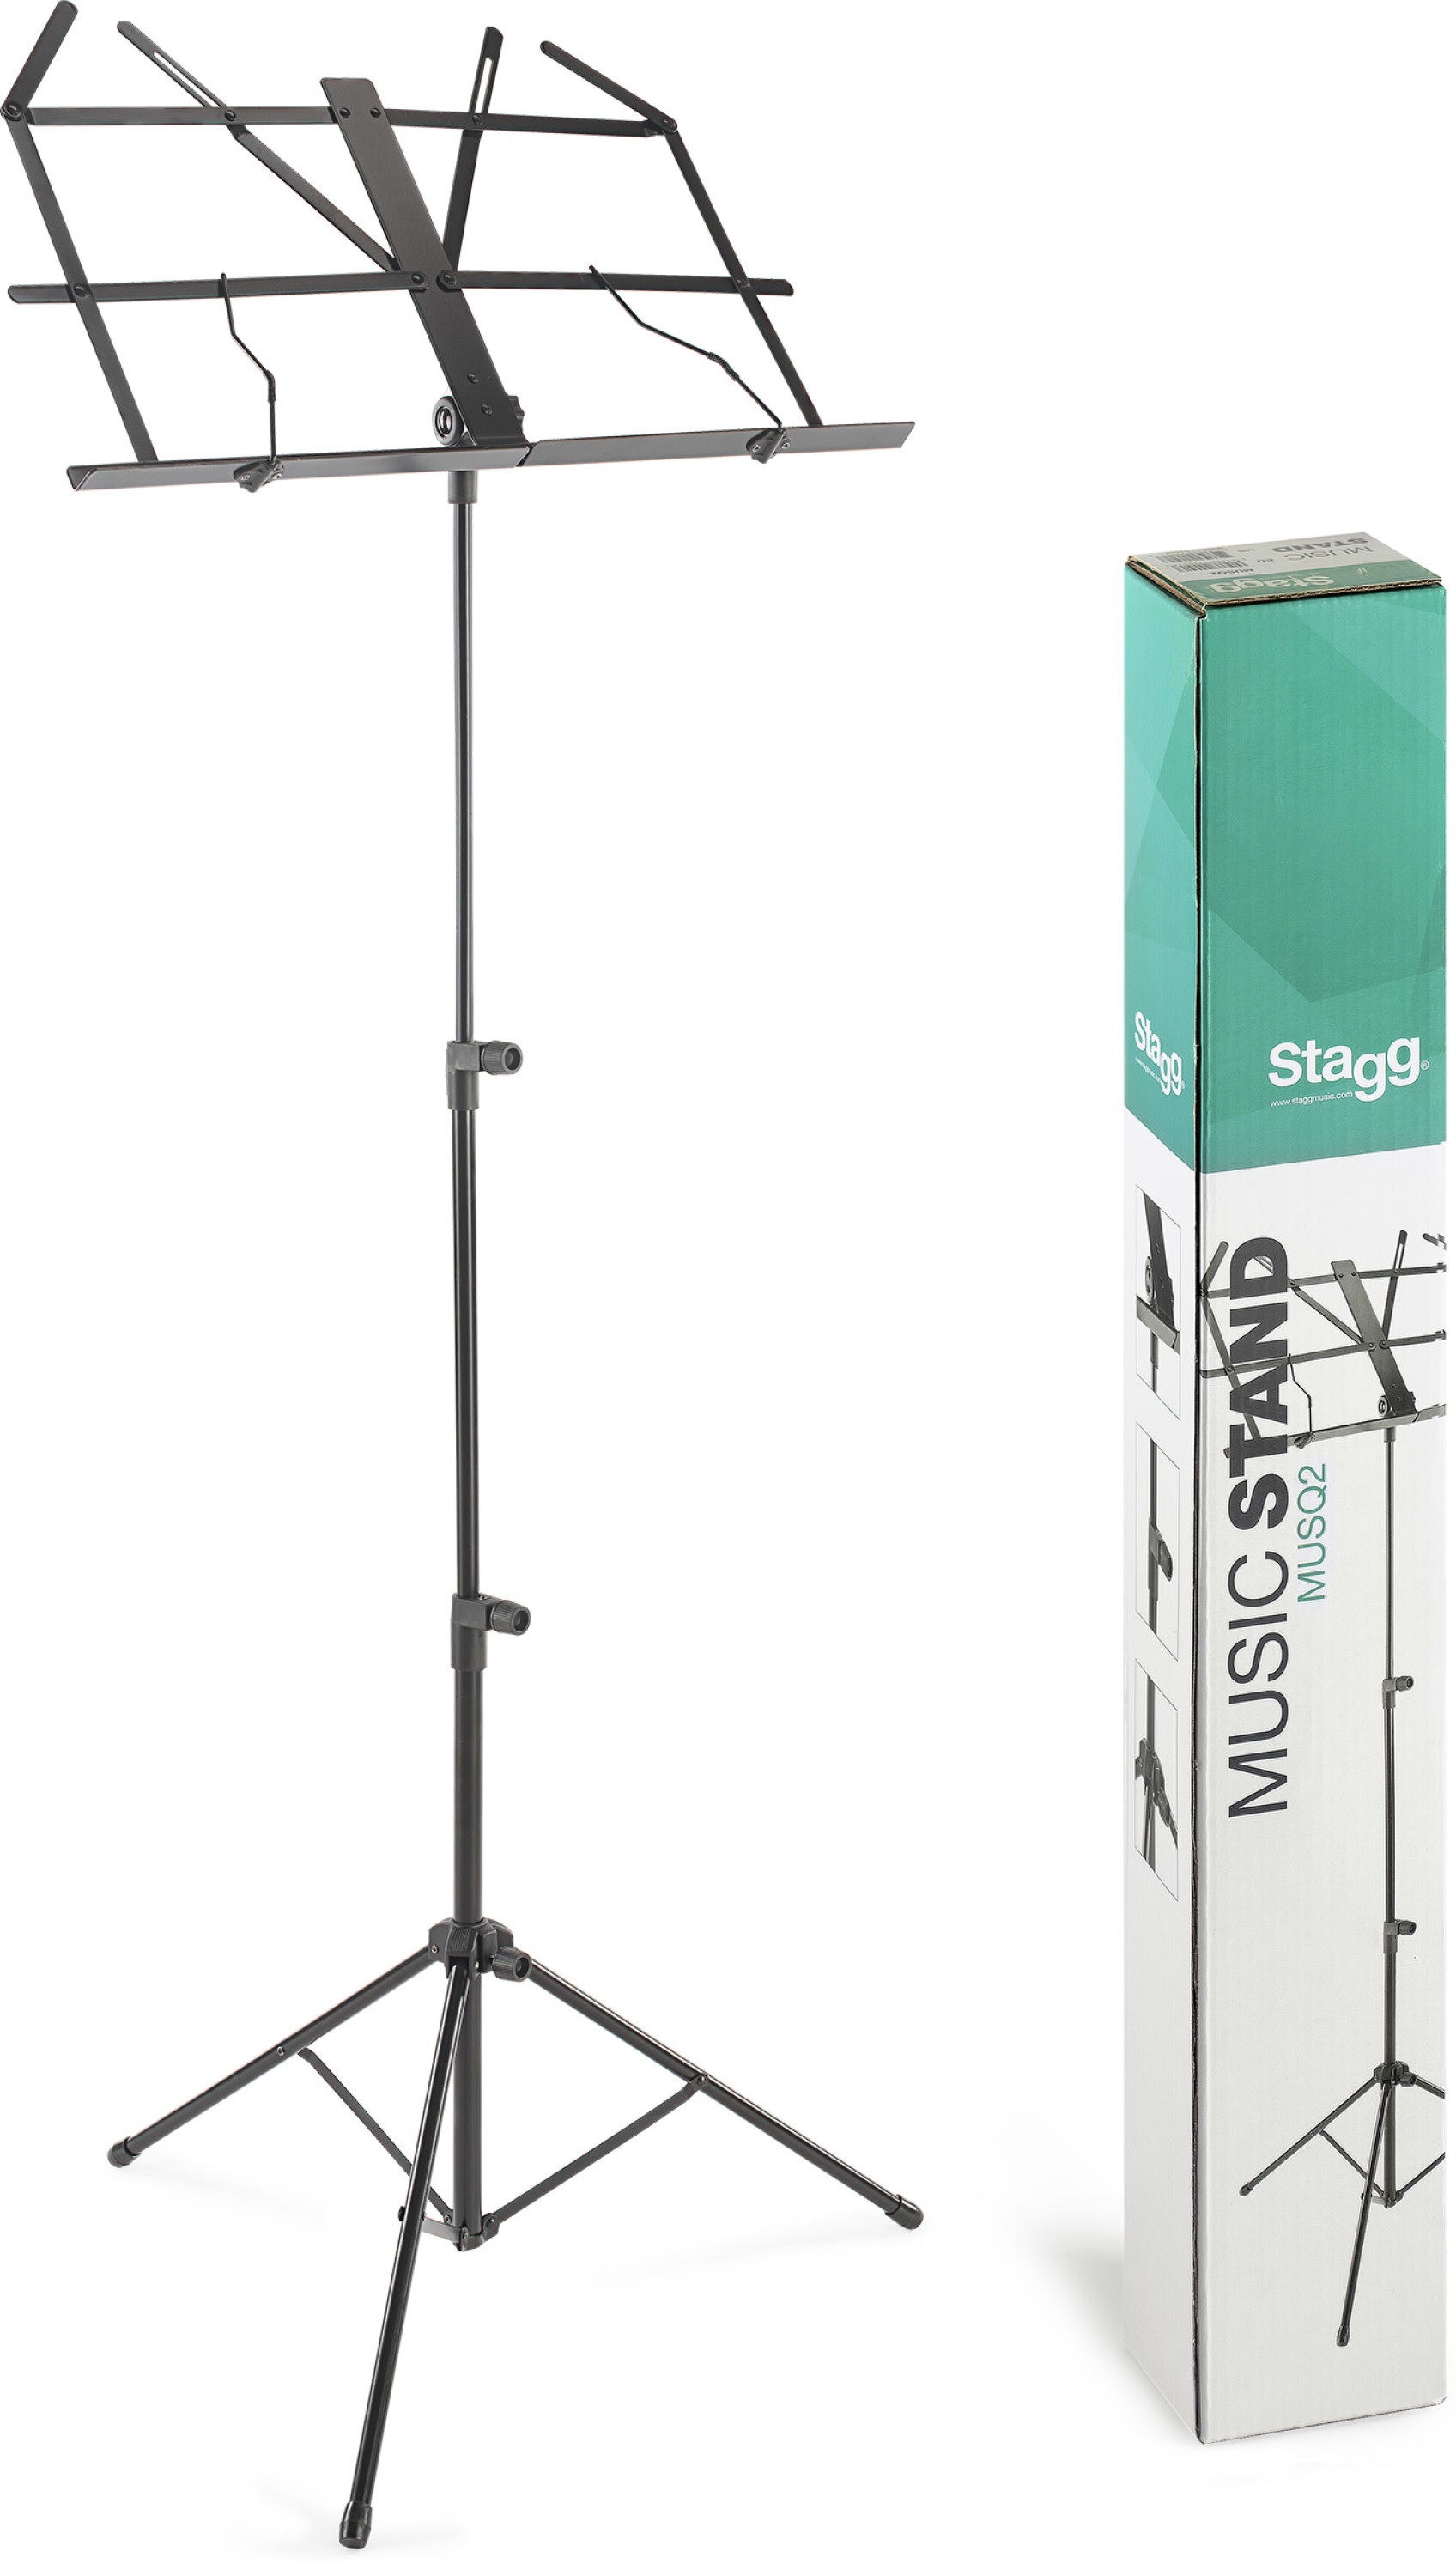 Q series music stand. Adjustable height: 48-114cm (19